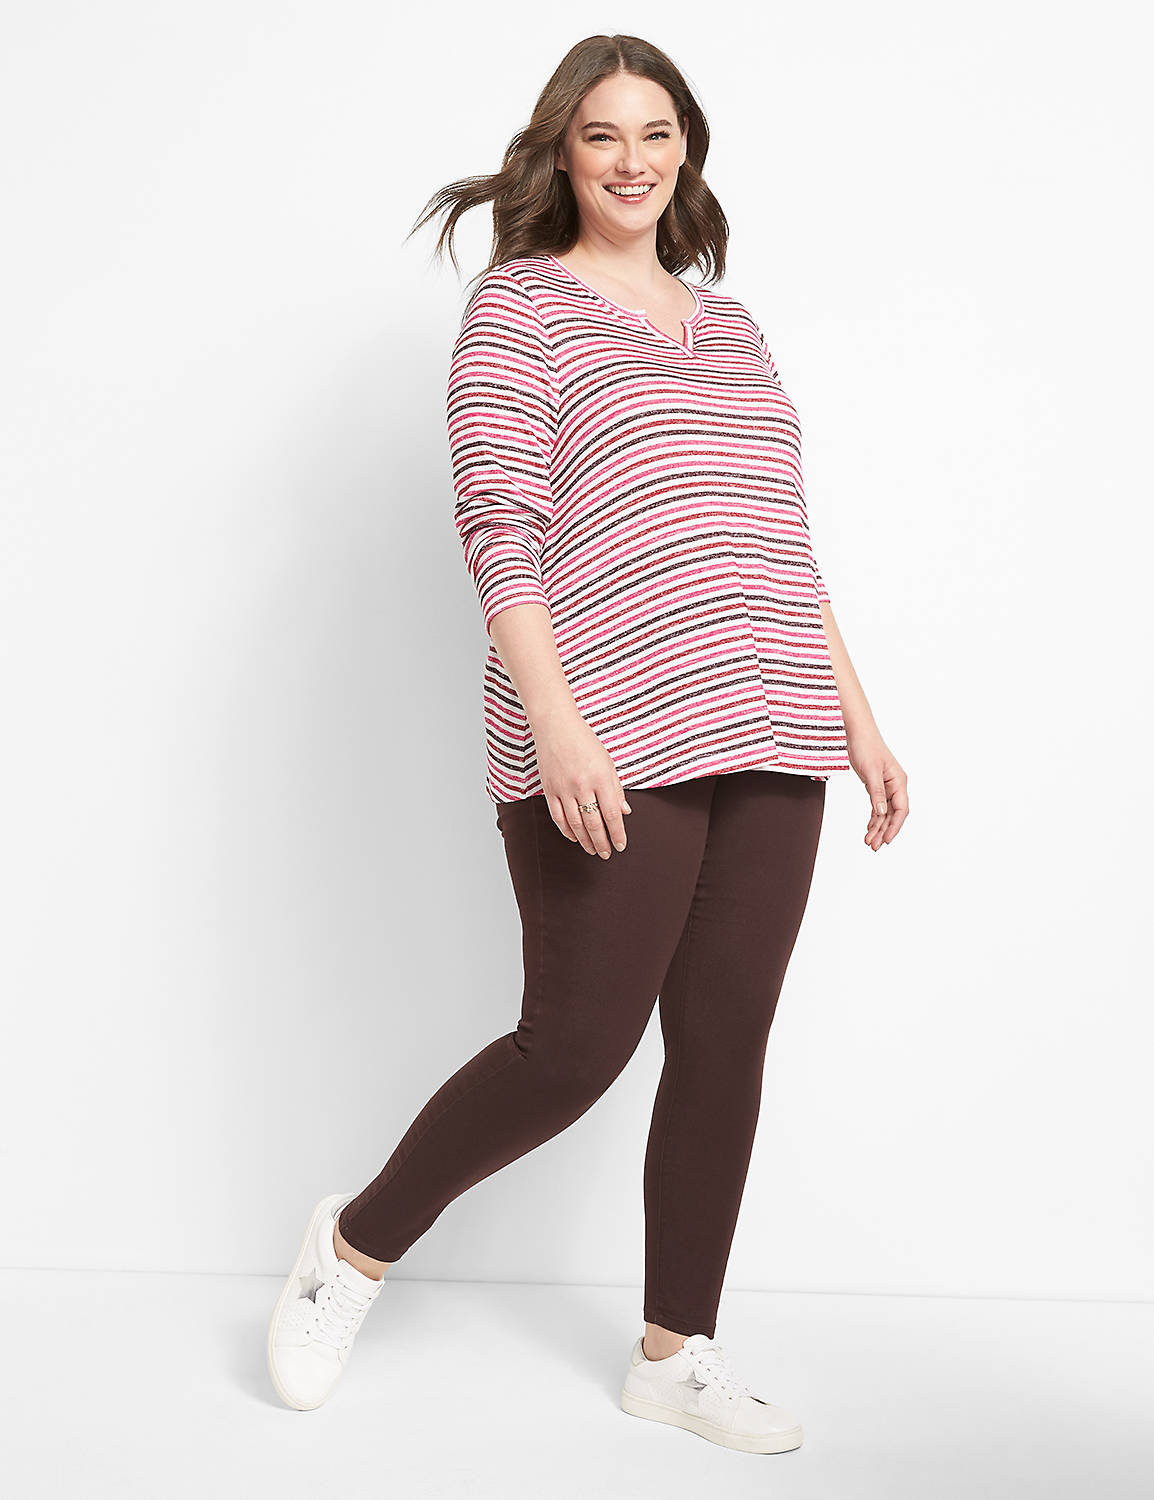 Long Sleeve Notch Neck Swing Tee Print 1123731:LBH21149_VailStripeTwoWay_V2_CW9:10/12 Product Image 3